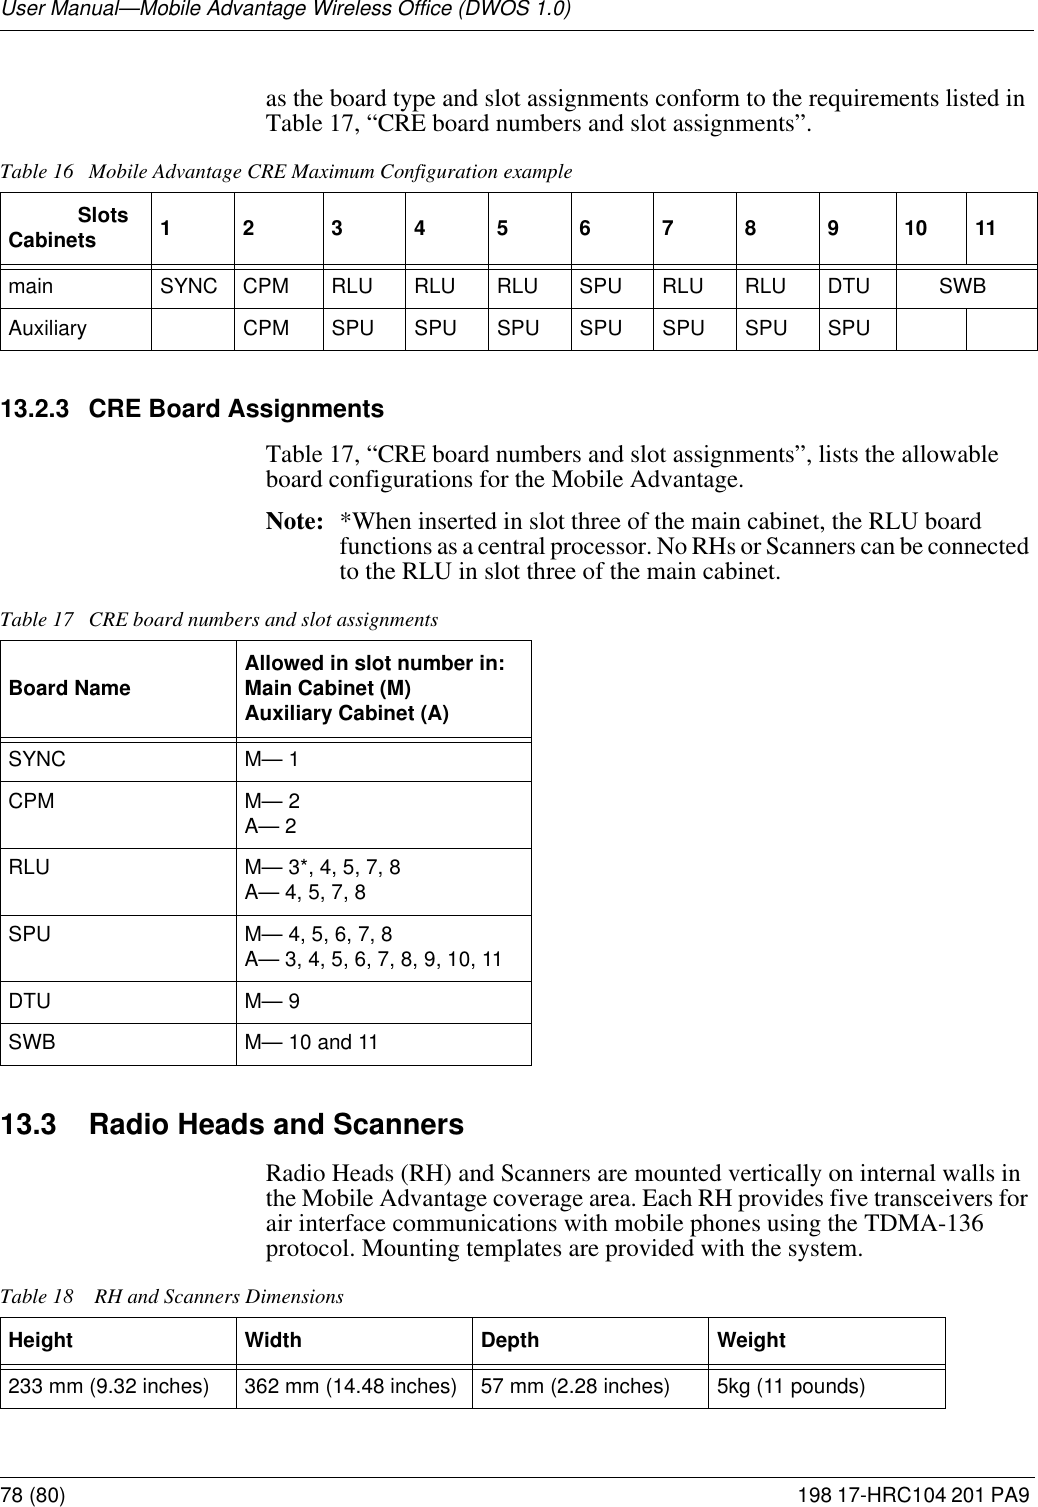 User Manual—Mobile Advantage Wireless Office (DWOS 1.0)78 (80) 198 17-HRC104 201 PA9 as the board type and slot assignments conform to the requirements listed in Table 17, “CRE board numbers and slot assignments”. 13.2.3 CRE Board AssignmentsTable 17, “CRE board numbers and slot assignments”, lists the allowable board configurations for the Mobile Advantage. Note: *When inserted in slot three of the main cabinet, the RLU board functions as a central processor. No RHs or Scanners can be connected to the RLU in slot three of the main cabinet.13.3 Radio Heads and ScannersRadio Heads (RH) and Scanners are mounted vertically on internal walls in the Mobile Advantage coverage area. Each RH provides five transceivers for air interface communications with mobile phones using the TDMA-136 protocol. Mounting templates are provided with the system. Table 16 Mobile Advantage CRE Maximum Configuration example             SlotsCabinets 12 34567891011main SYNC CPM RLU RLU RLU SPU RLU RLU DTU       SWBAuxiliary CPM SPU SPU SPU SPU SPU SPU SPUTable 17 CRE board numbers and slot assignmentsBoard Name Allowed in slot number in:Main Cabinet (M)Auxiliary Cabinet (A)SYNC M— 1CPM M— 2A— 2RLU M— 3*, 4, 5, 7, 8A— 4, 5, 7, 8SPU M— 4, 5, 6, 7, 8A— 3, 4, 5, 6, 7, 8, 9, 10, 11DTU M— 9SWB M— 10 and 11Table 18 RH and Scanners Dimensions Height Width  Depth  Weight 233 mm (9.32 inches) 362 mm (14.48 inches) 57 mm (2.28 inches) 5kg (11 pounds)